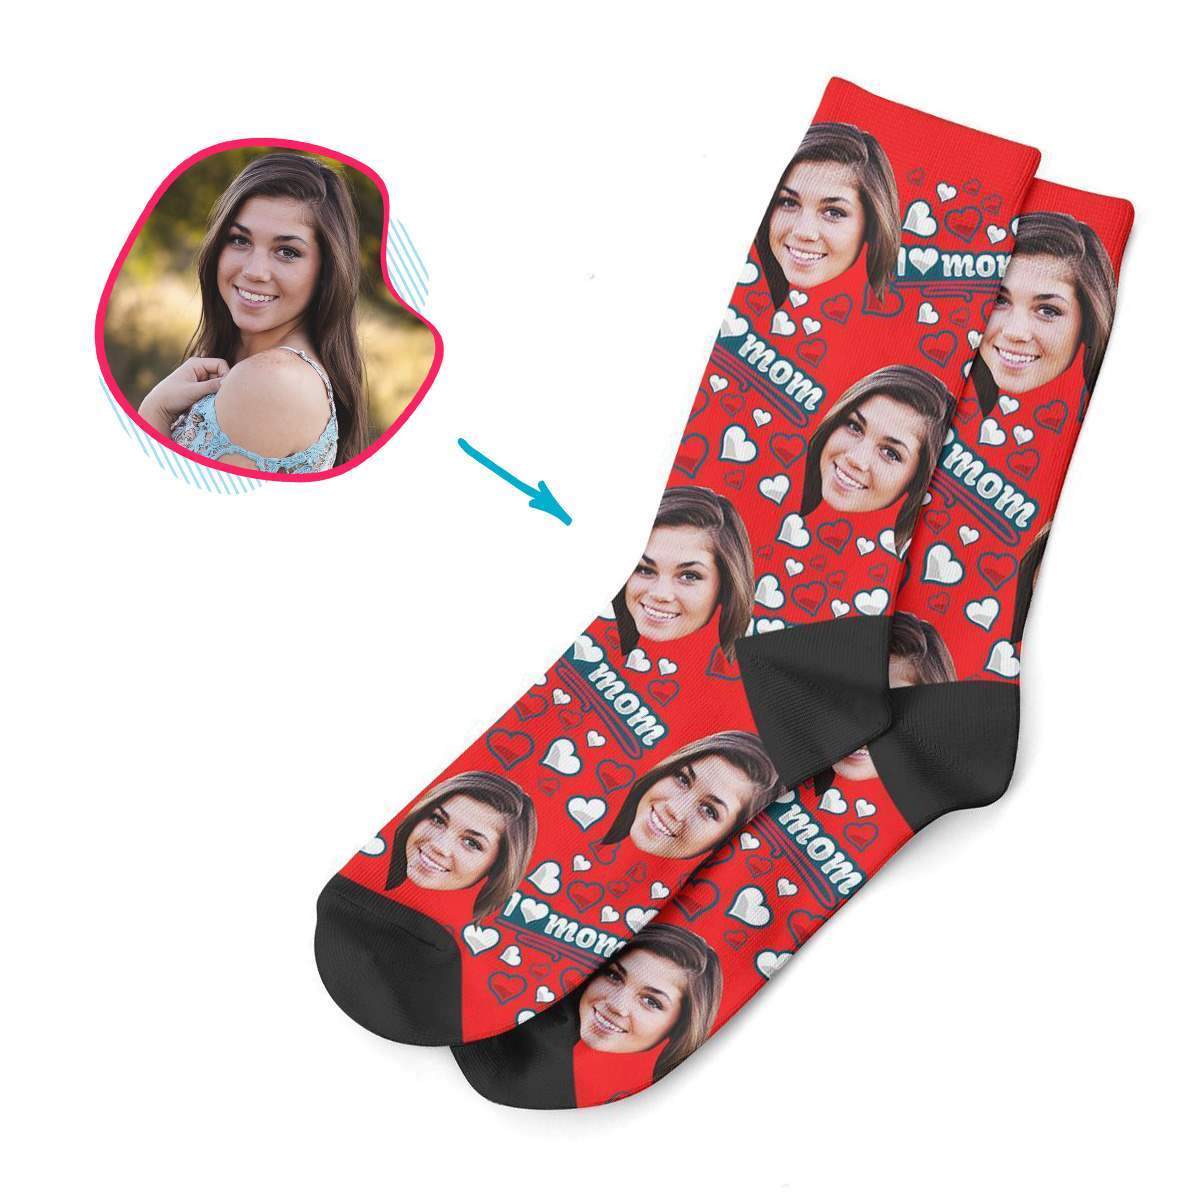 red Love Mom socks personalized with photo of face printed on them